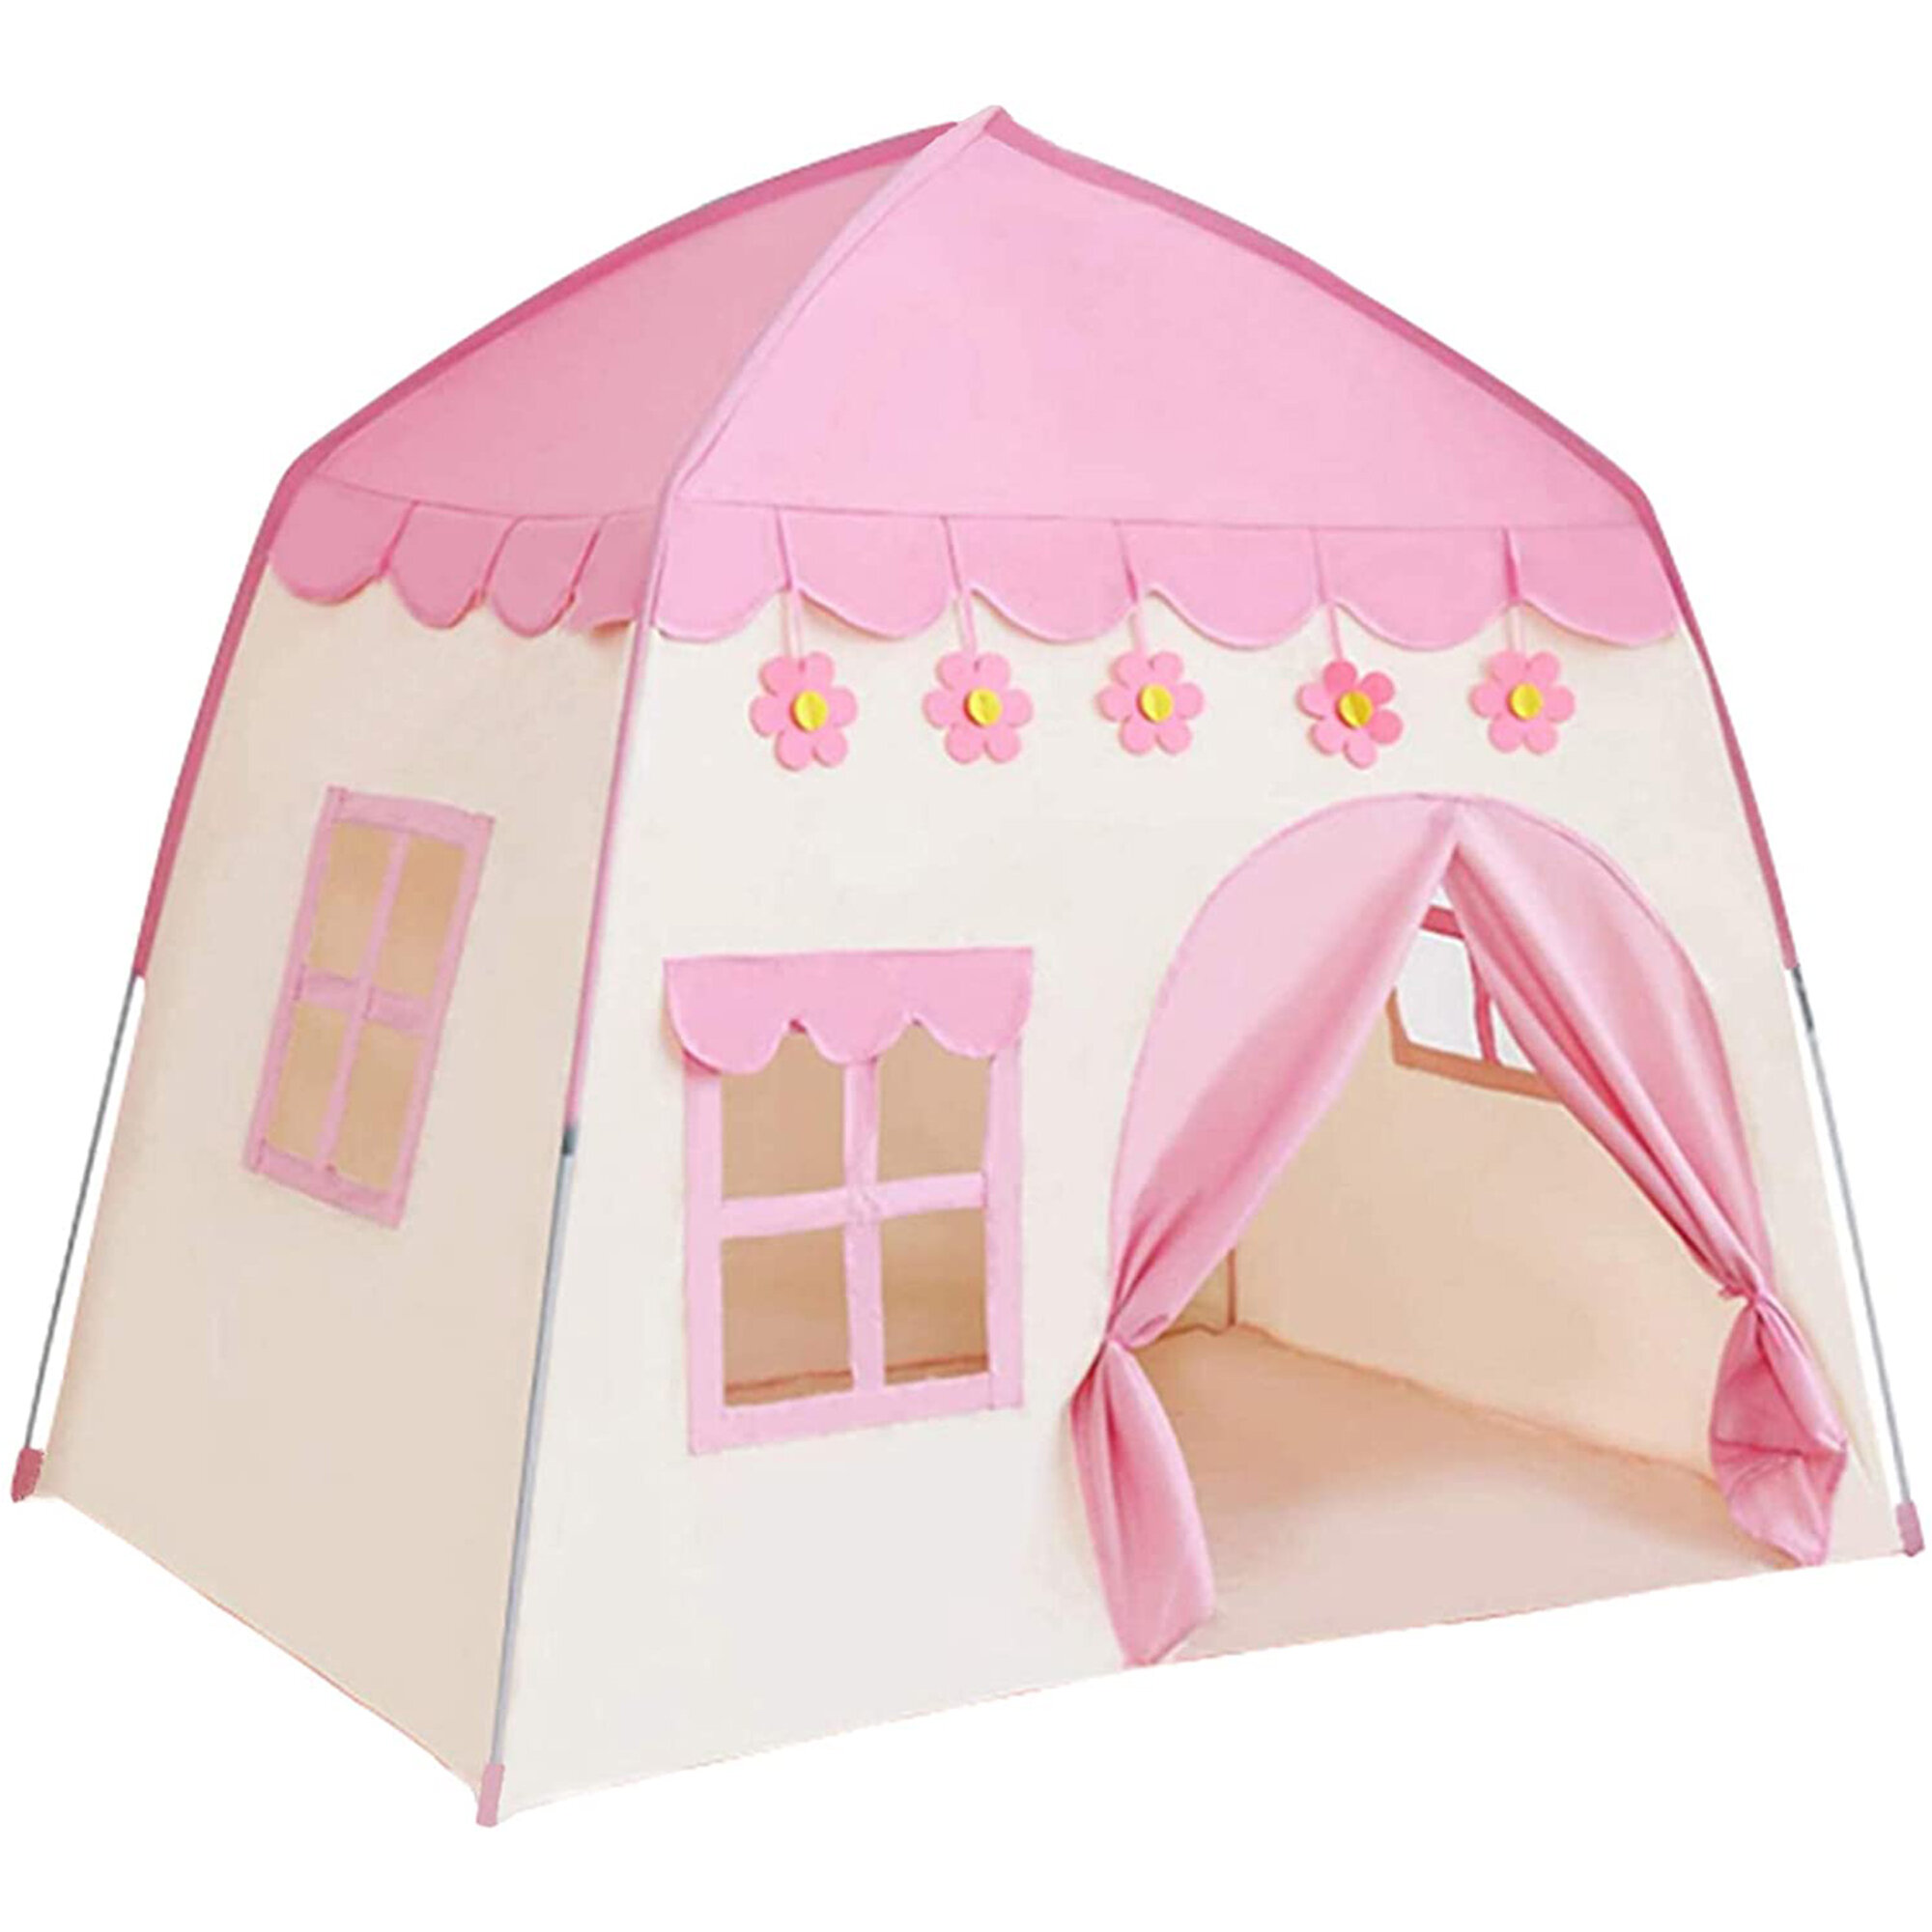 Girls Pink Princess Castle Playhouse Child Kids Play Tent Toys Indoor/Outdoor US 